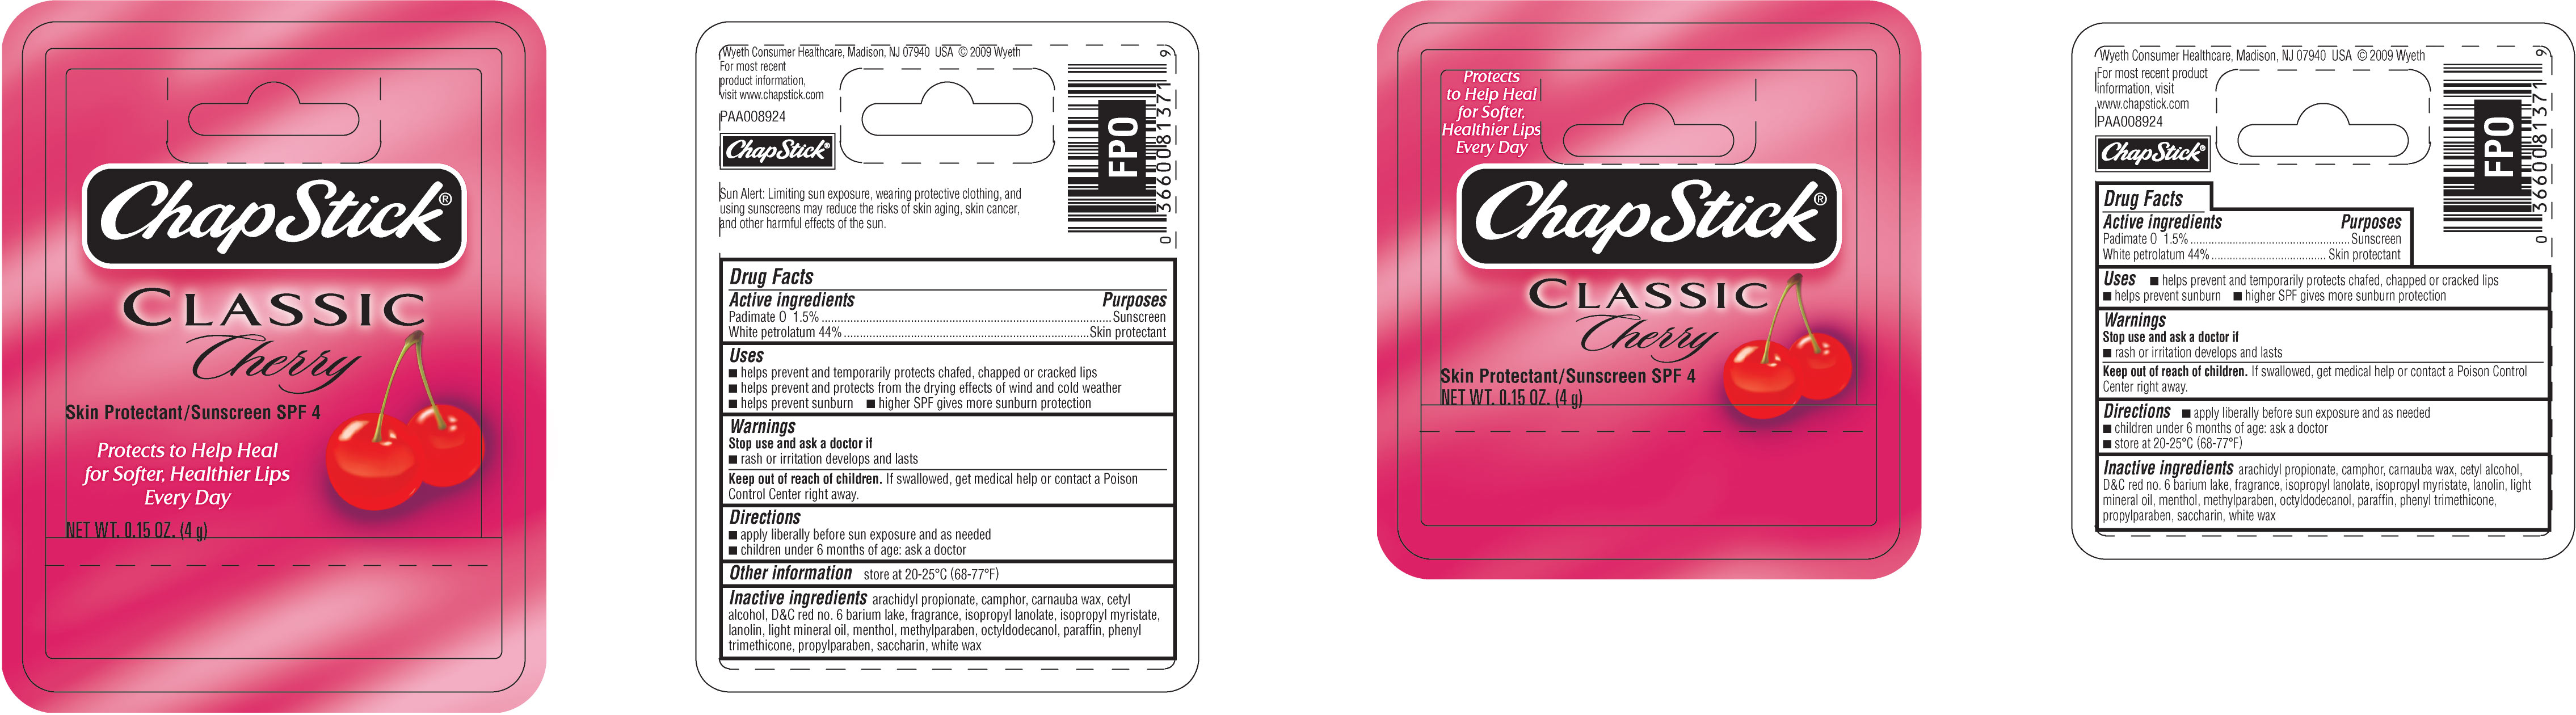 ChapStick Classic Cherry Packaging